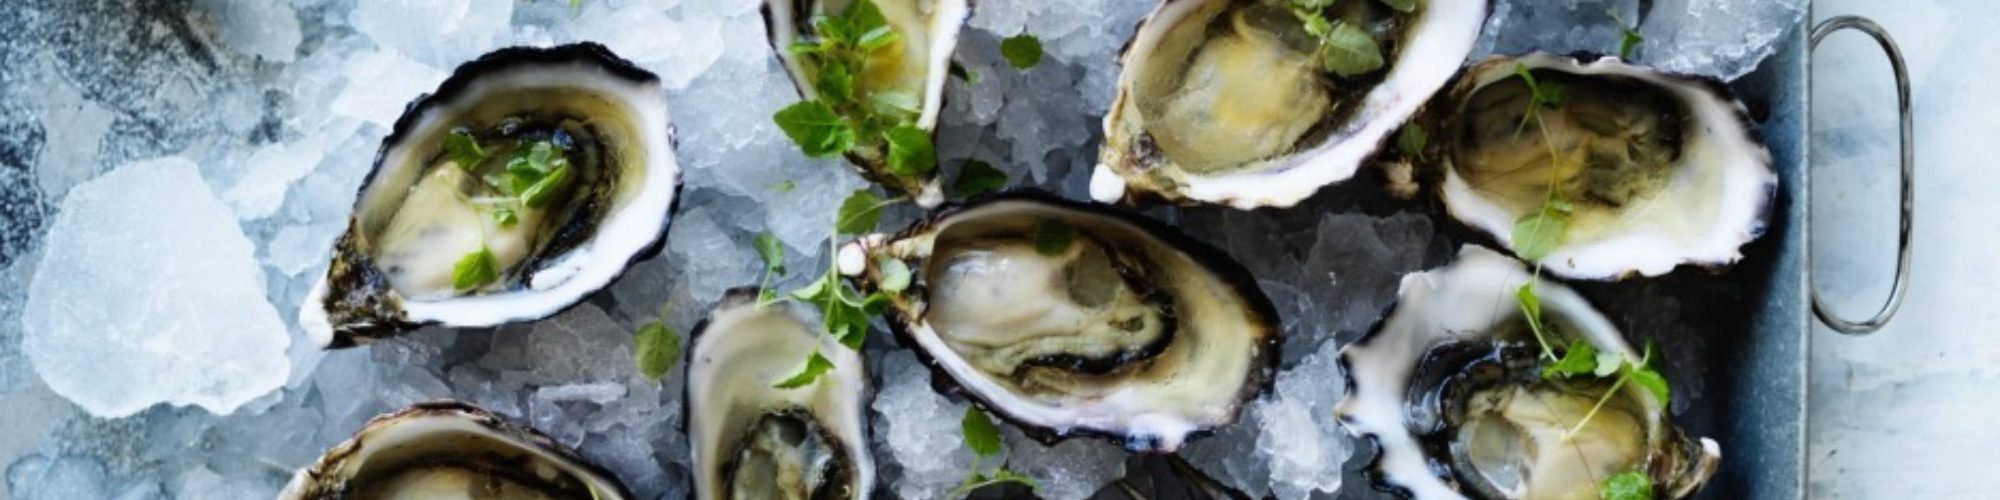 Oysters Raw